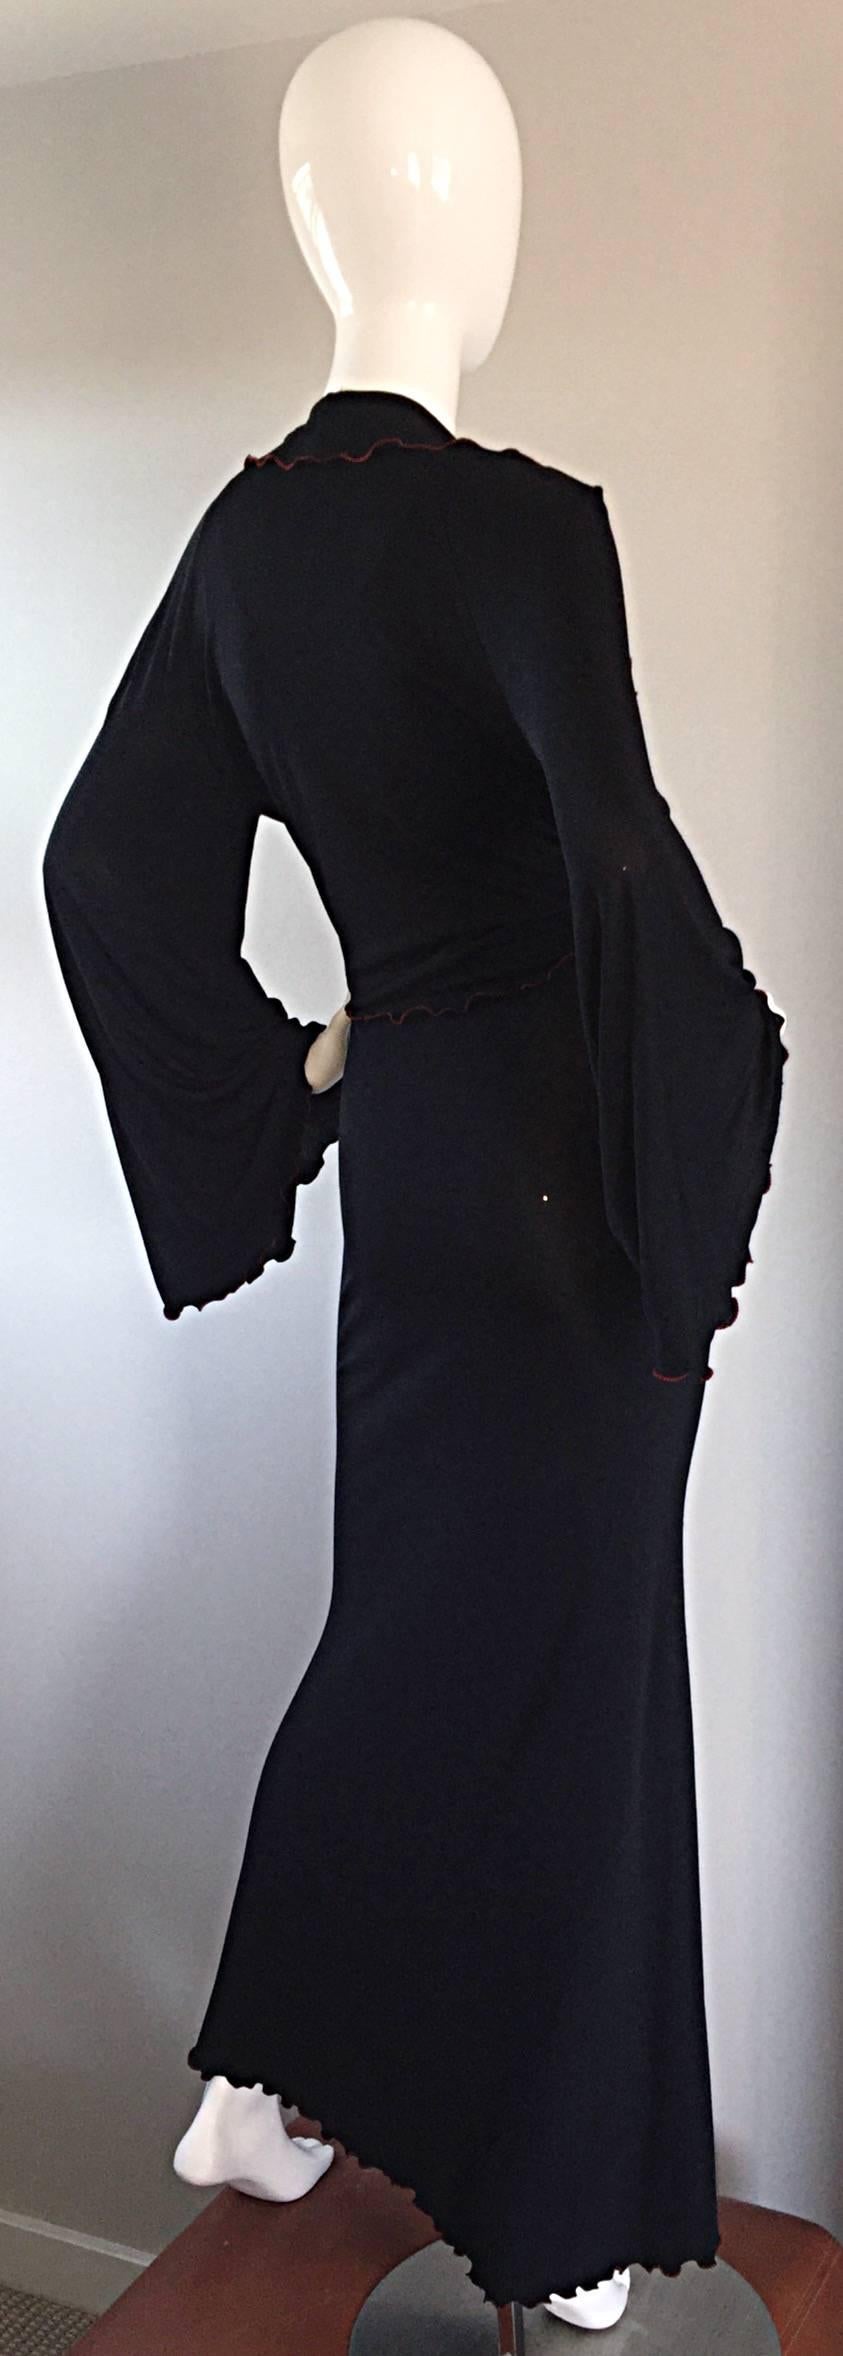 Sexiest vintage Stephen Burrows black 70s double jersey dress, and matching jacket! Jet black color, with red lettuce edging details on both the dress and jacket. Both pieces look incredible together, or as separates! Hugs the body in all the right